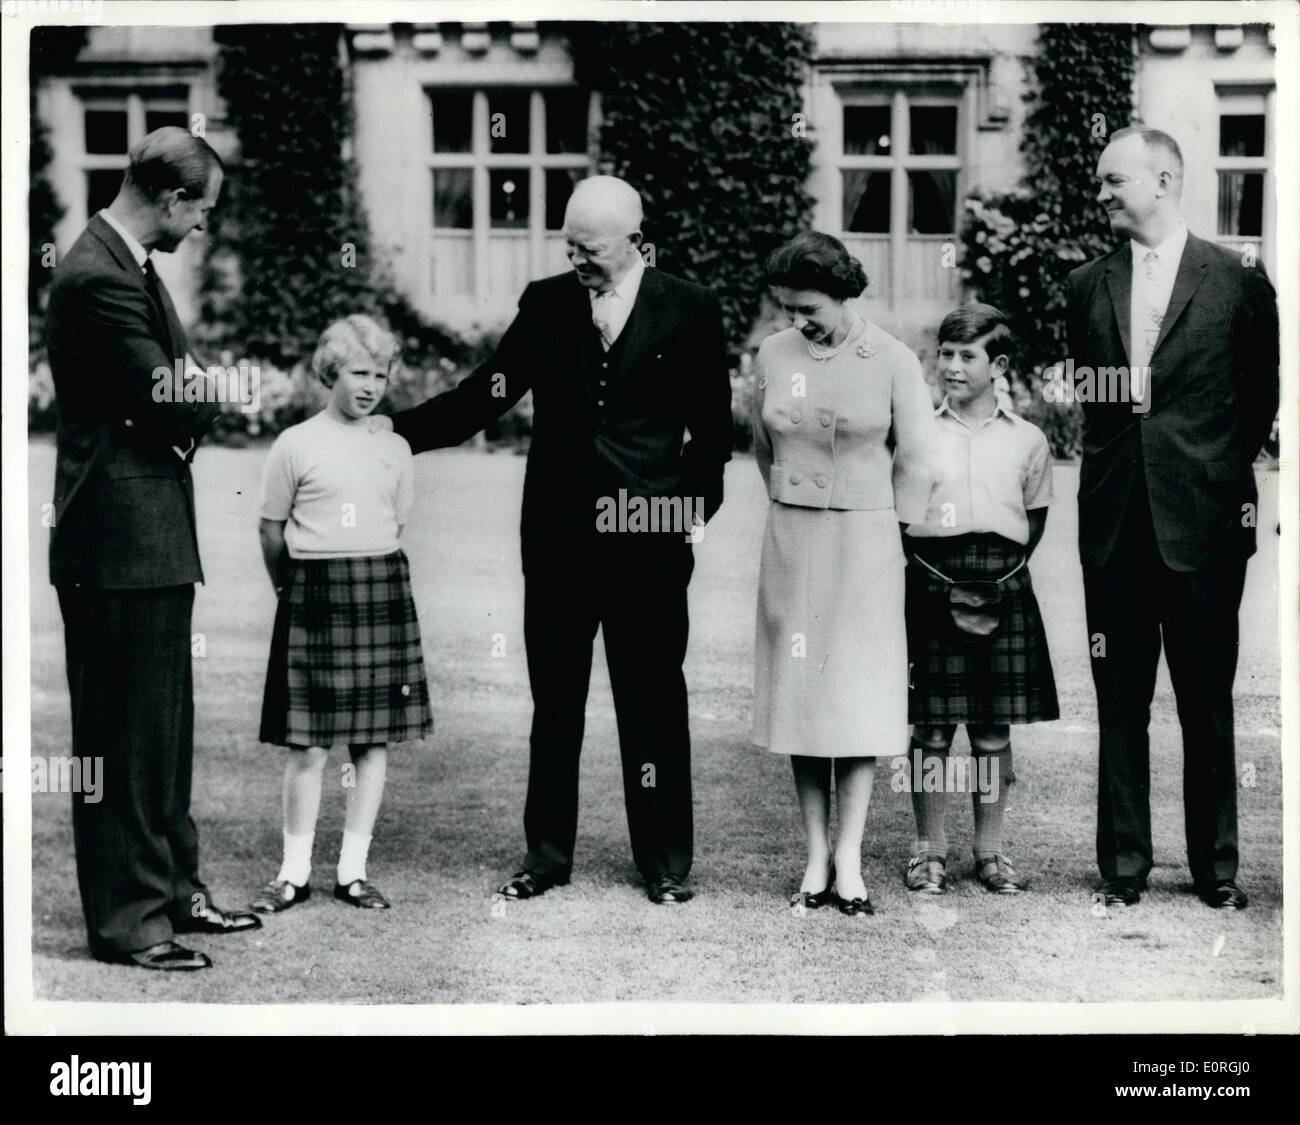 Aug. 08, 1959 - President Eisenhower meets the Royal Family at Balmoral Castle.: Prisdent Eisenhower spent a happy ten minutes chatting and being photographed with the Royal Family on the lawns at Balmorel Castle today before leaving on his trip south to Chequers where he will spend the week-end having talks with Mr. Macmillan. Photo shows President Eisenhower puts his hand on Princess Anne's shoulders as he poses for photographs with the Queen, Prince Philip, the Prince of Wales and on right is Major John Eisenhower, the President's son. Stock Photo